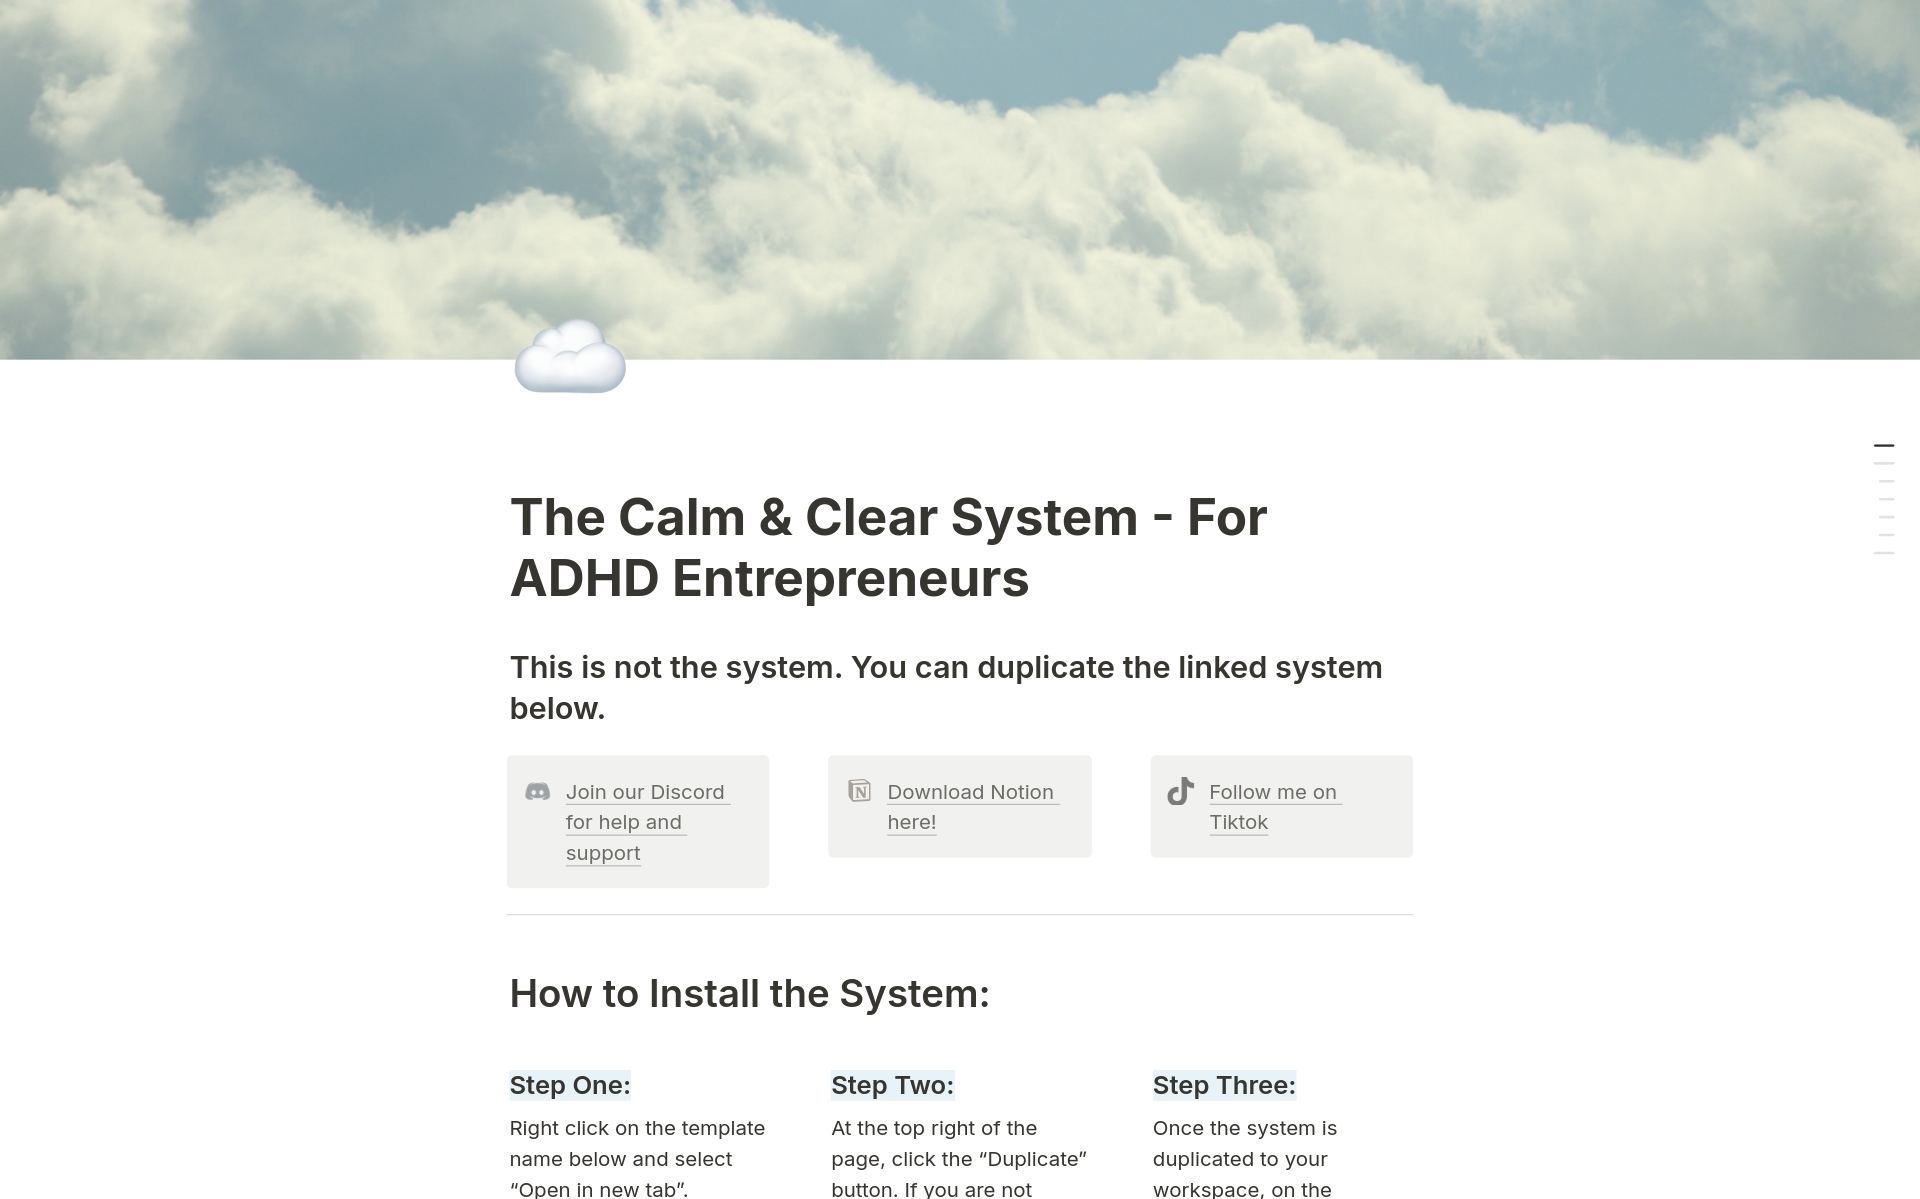 The Calm & Clear System - For ADHD Entrepreneursのテンプレートのプレビュー